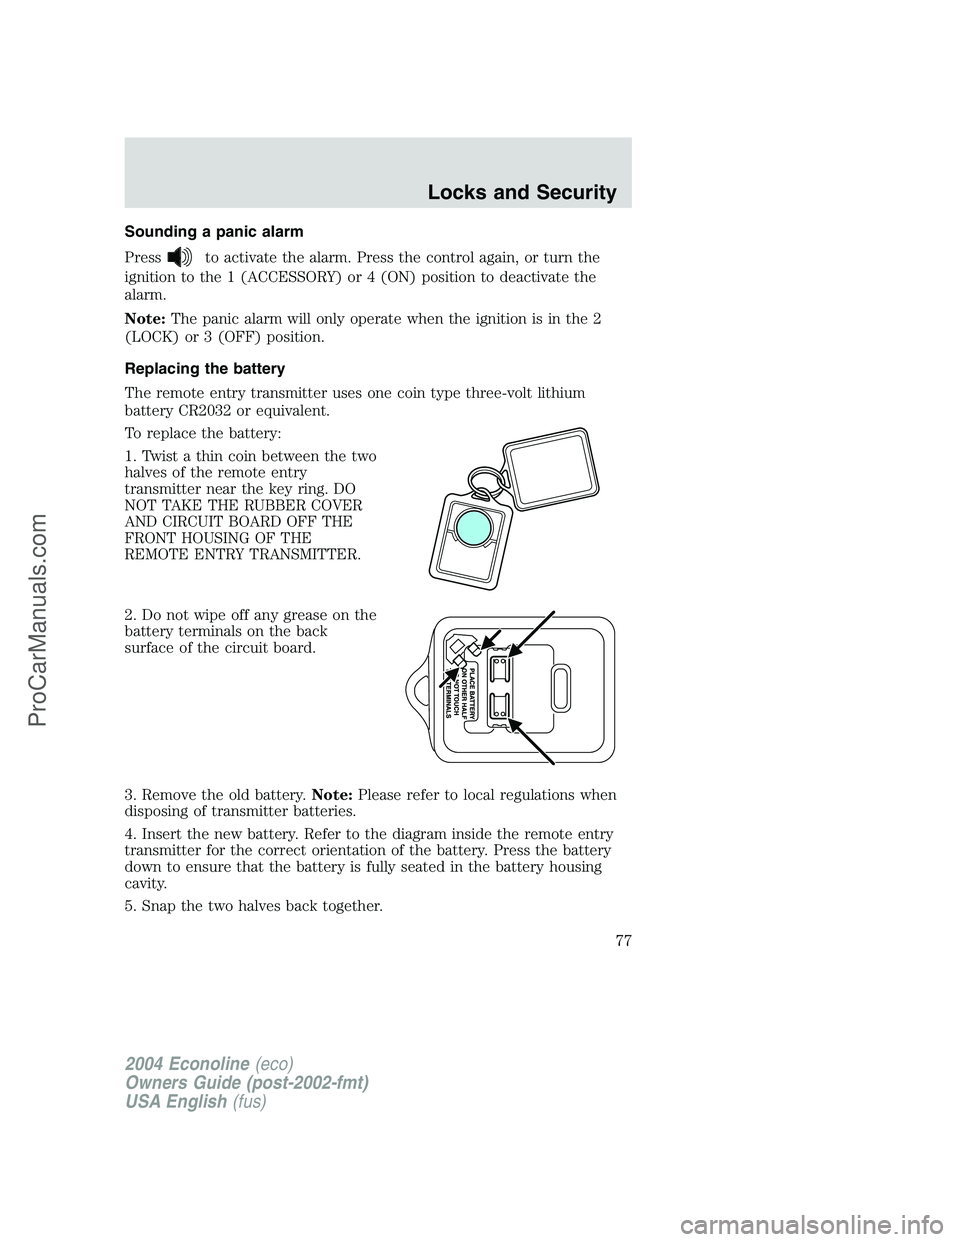 FORD E-350 2004  Owners Manual Sounding a panic alarm
Press
to activate the alarm. Press the control again, or turn the
ignition to the 1 (ACCESSORY) or 4 (ON) position to deactivate the
alarm.
Note:The panic alarm will only operat